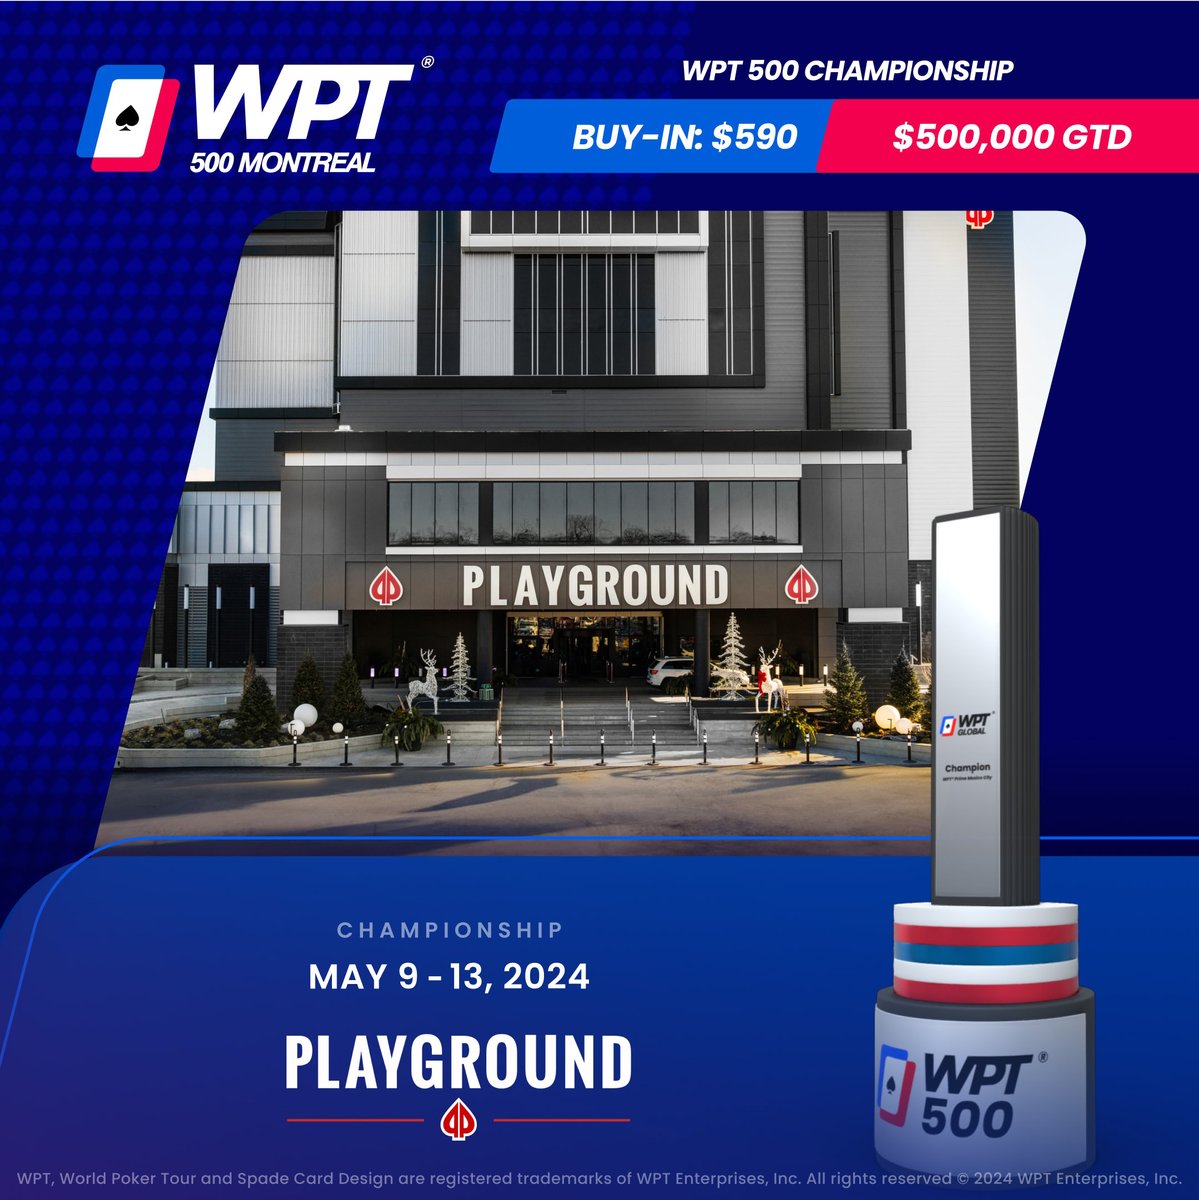 Day 1A of our #WPT500 $500,000 GTD gets underway at our @WPT Montreal Festival @PlaygroundPoker! 🇨🇦🏆

7 starting flights | 30,000 chips | 40m levels

This event is followed by an $1,150 CAD @WPTPrime Championship starting May 12th, a #WPTMUG on May 14th and a $3,500 CAD @WPT…